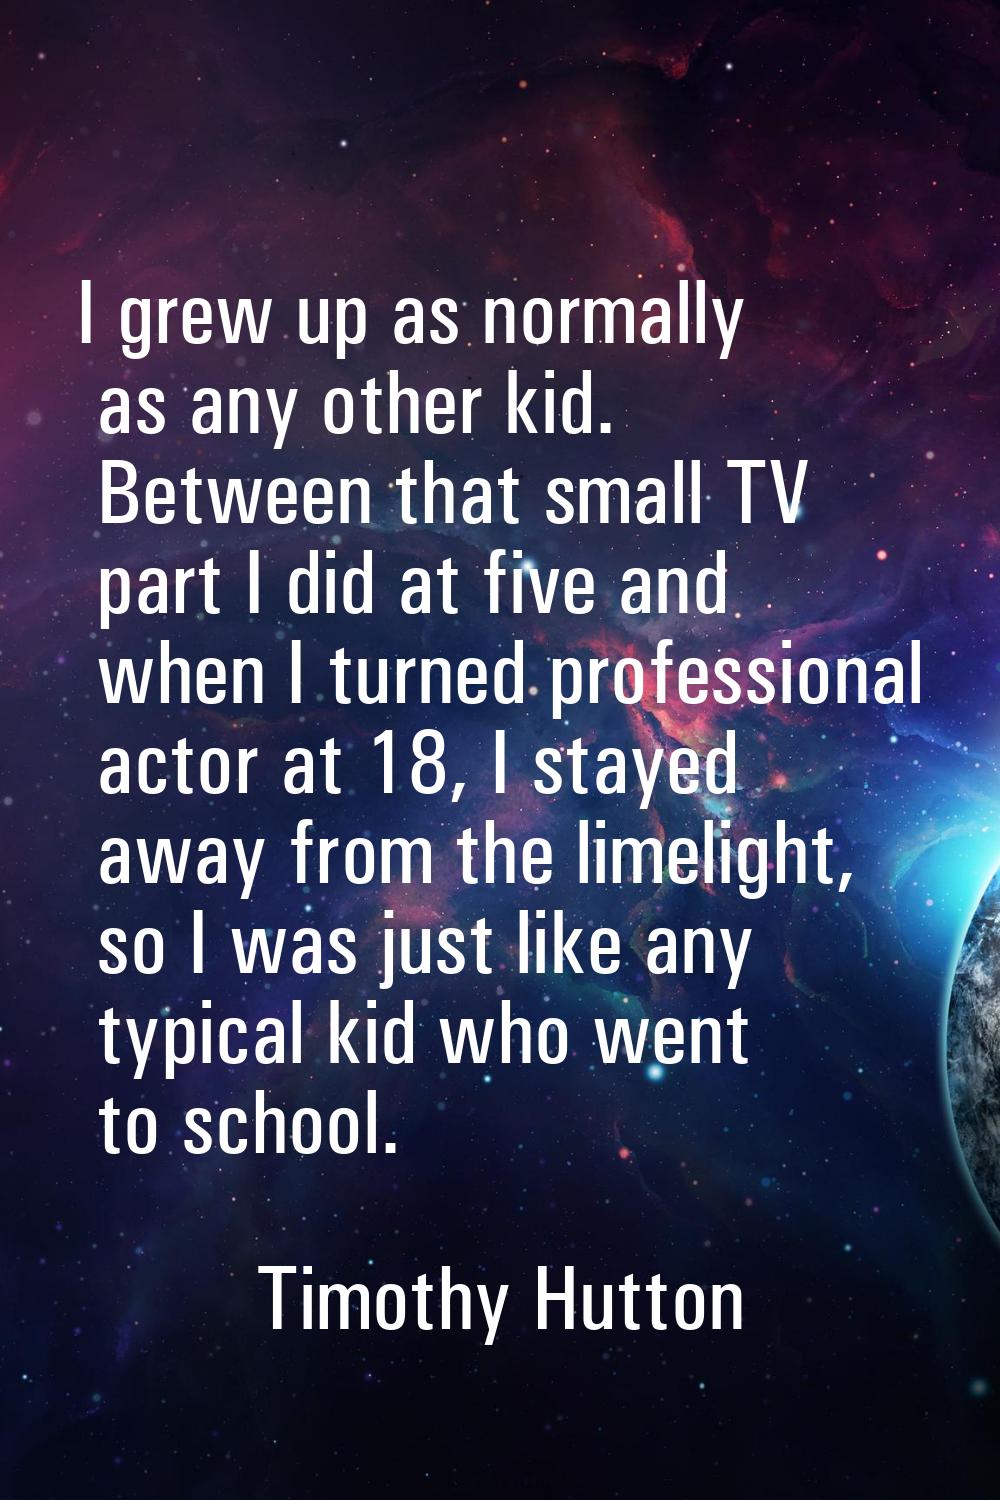 I grew up as normally as any other kid. Between that small TV part I did at five and when I turned 